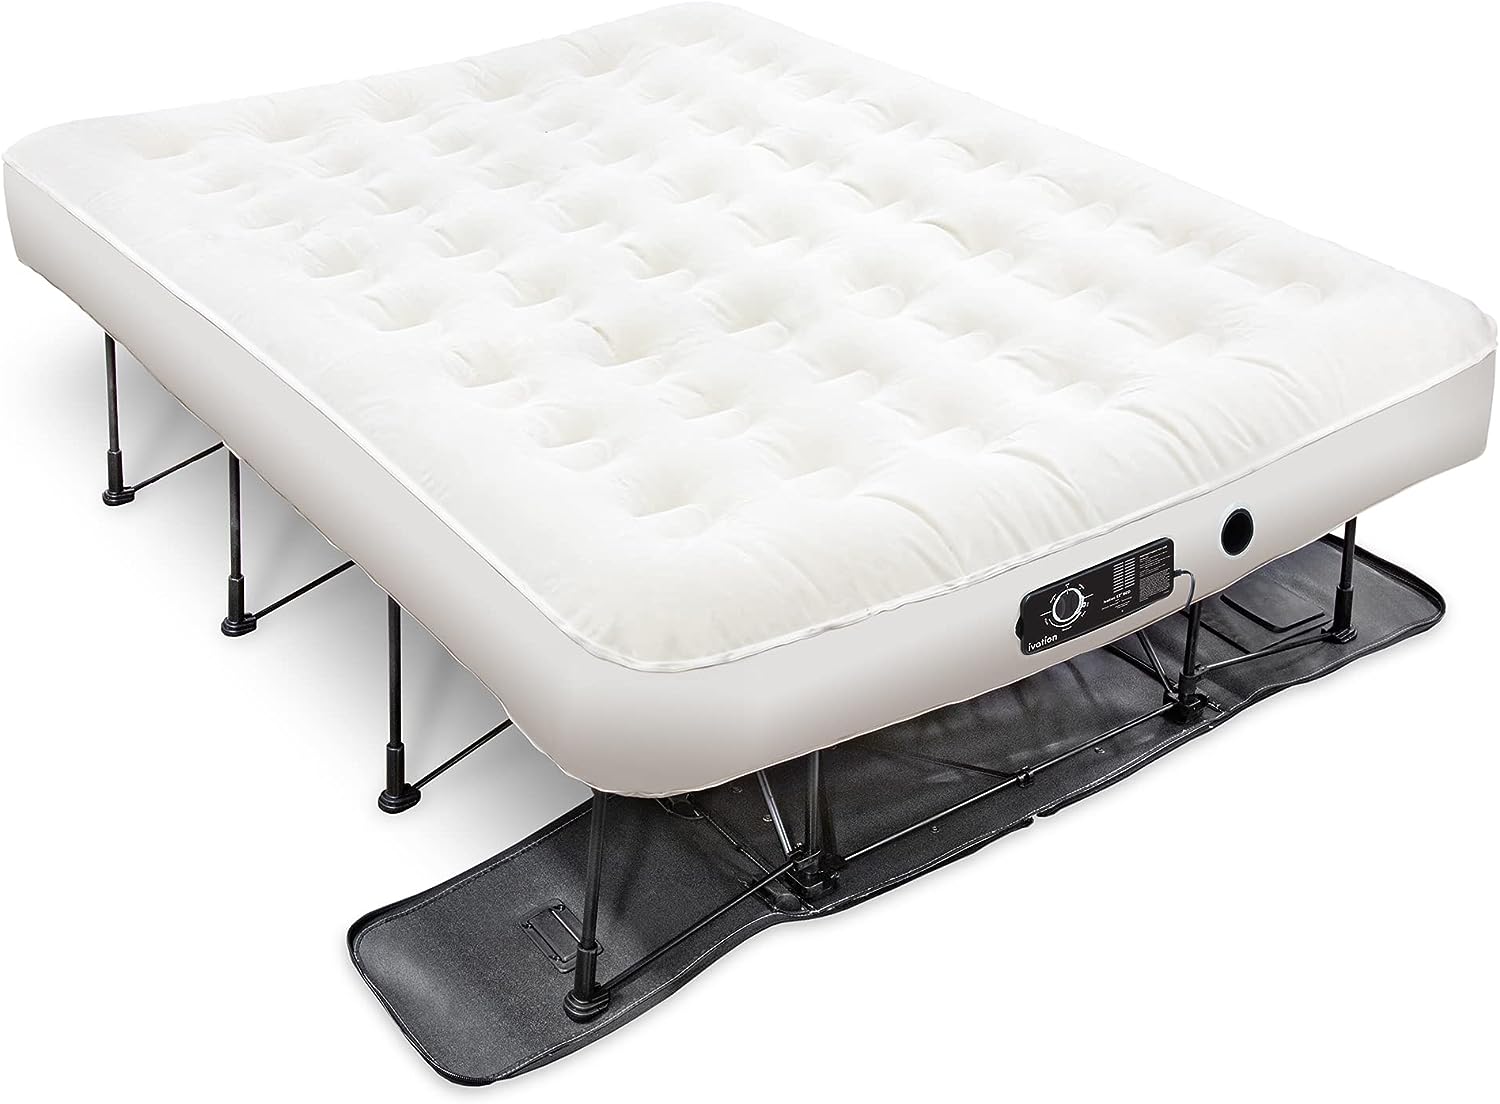 Ez-Bed (Twin) Air Mattress with Deflate Defender™ Technology Dual Auto Comfort Pump and Dual Layer Laminate Material - Airbed Frame & Rolling Case for Guest, Travel, Vacation, Camping